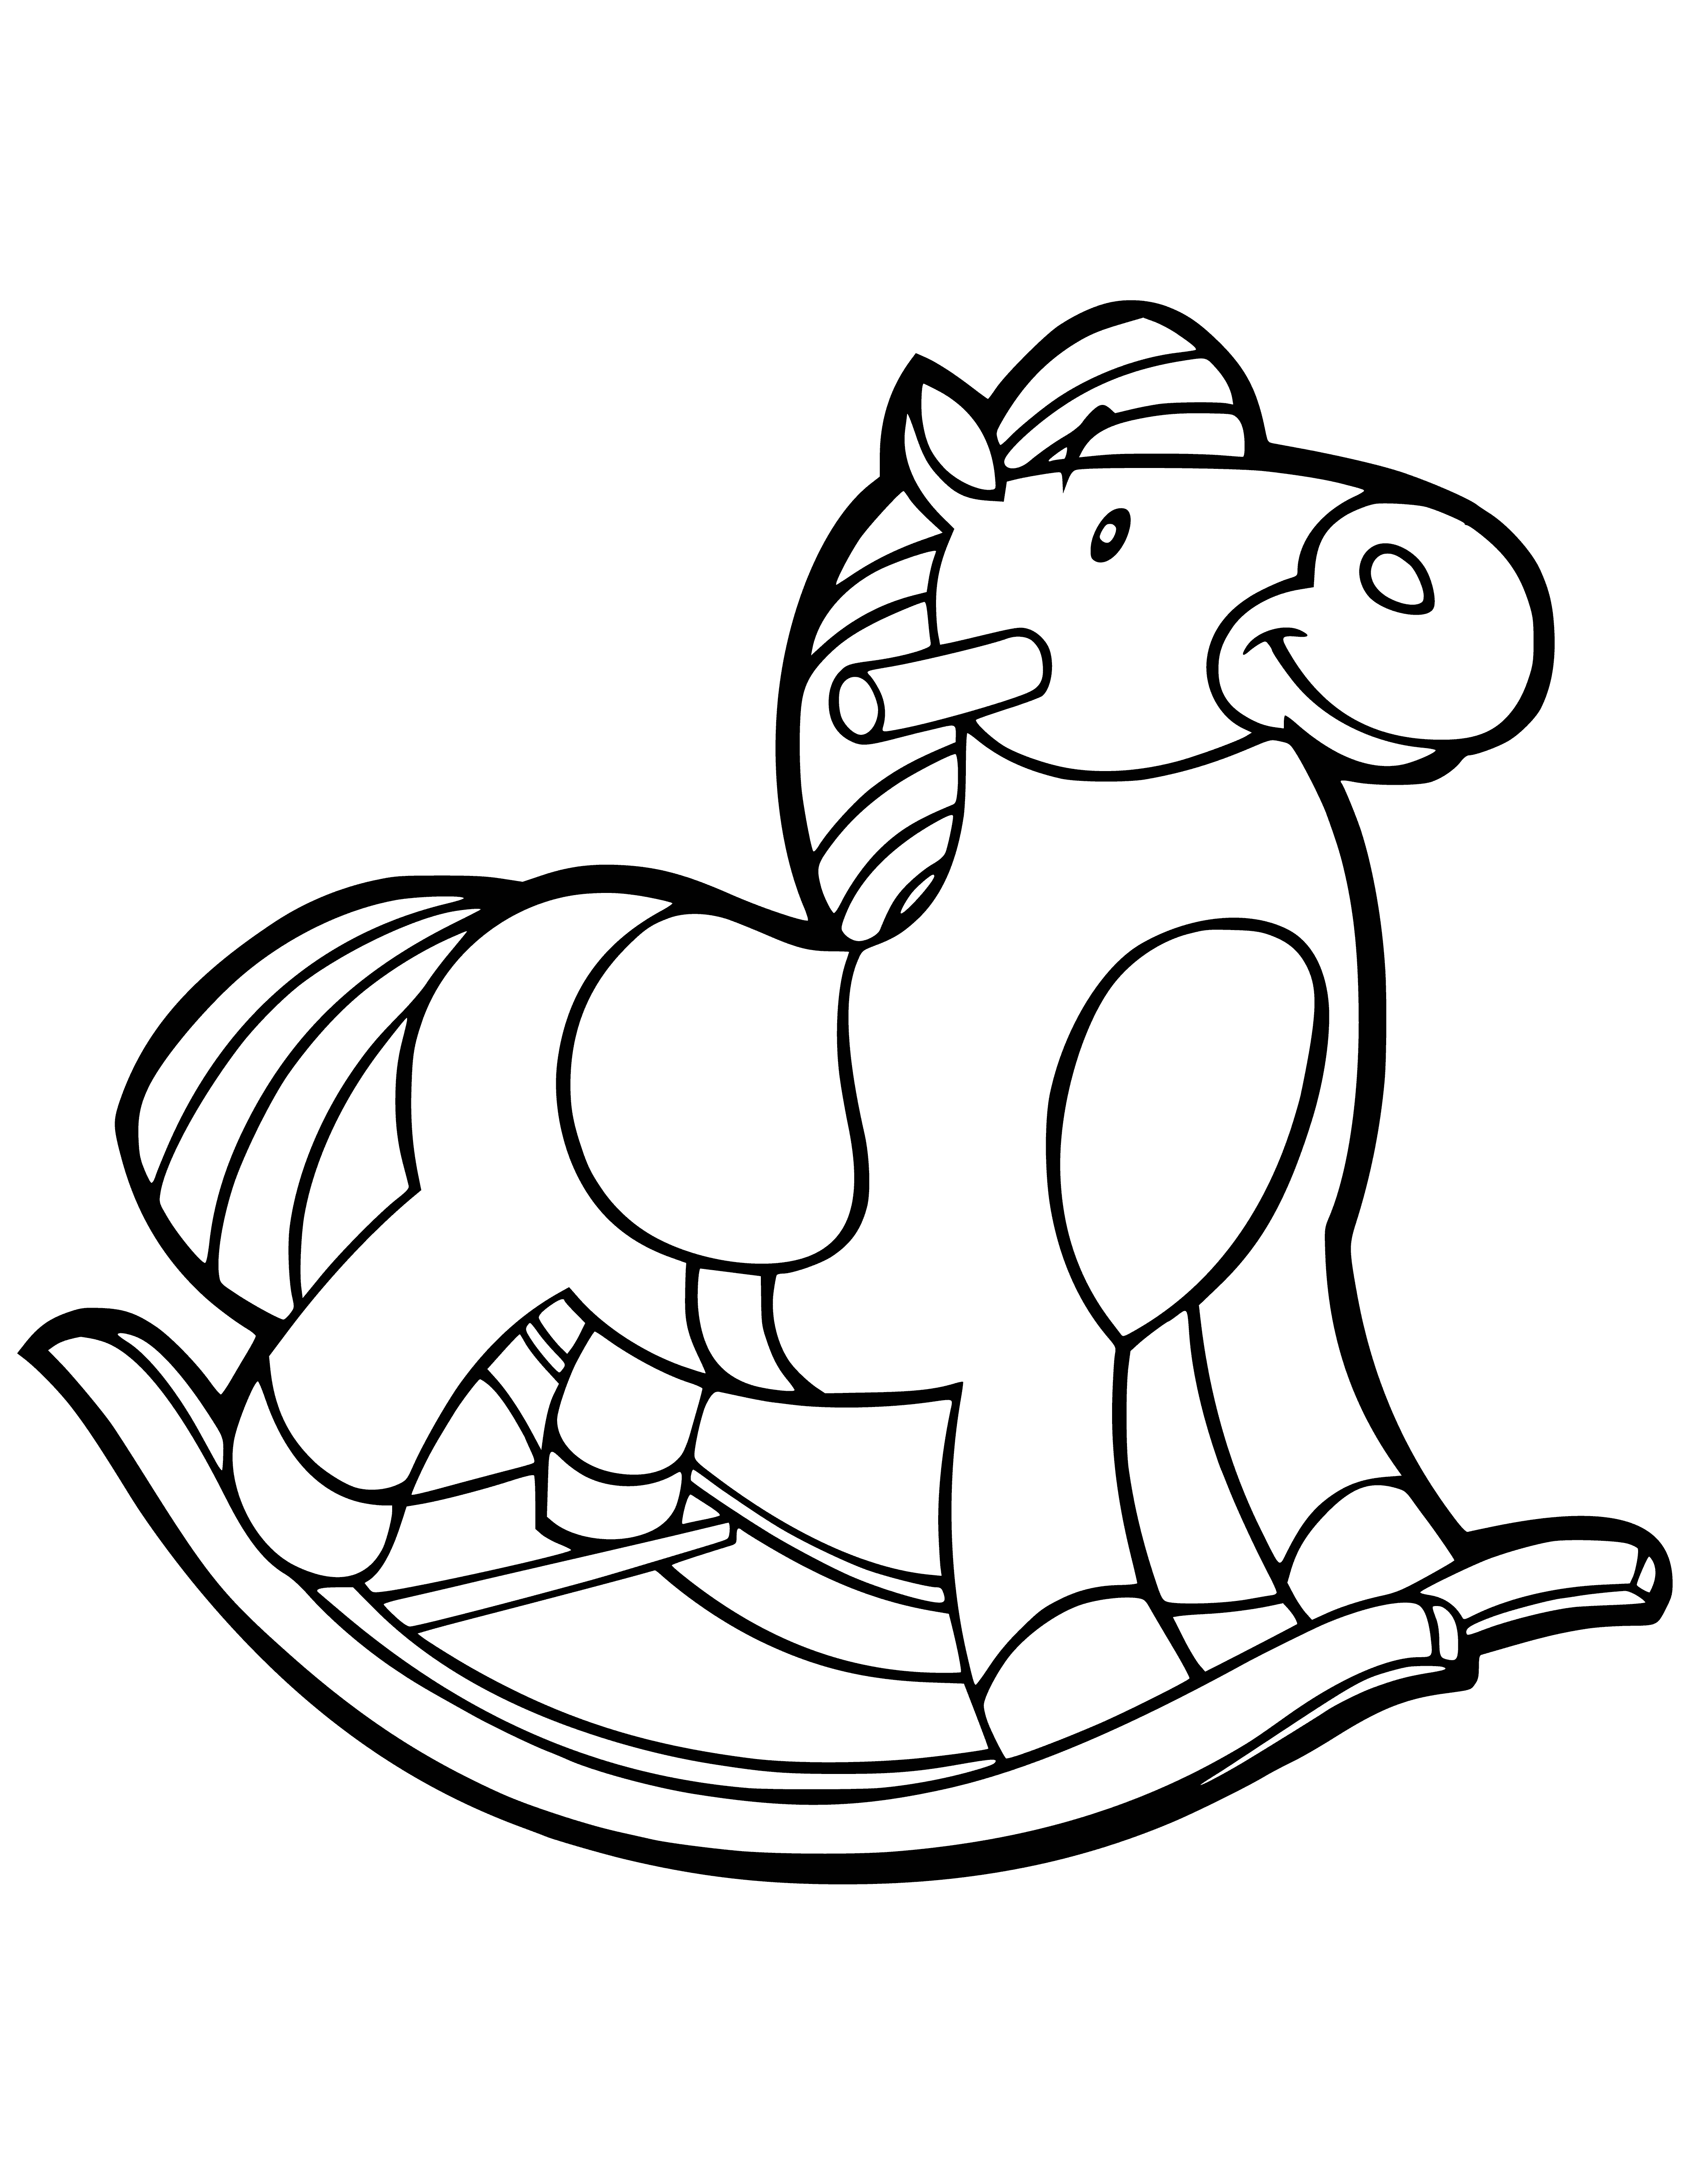 coloring page: Wooden rocking horse: brown leather saddle, reins, white mane/tail, body brown/white spots.